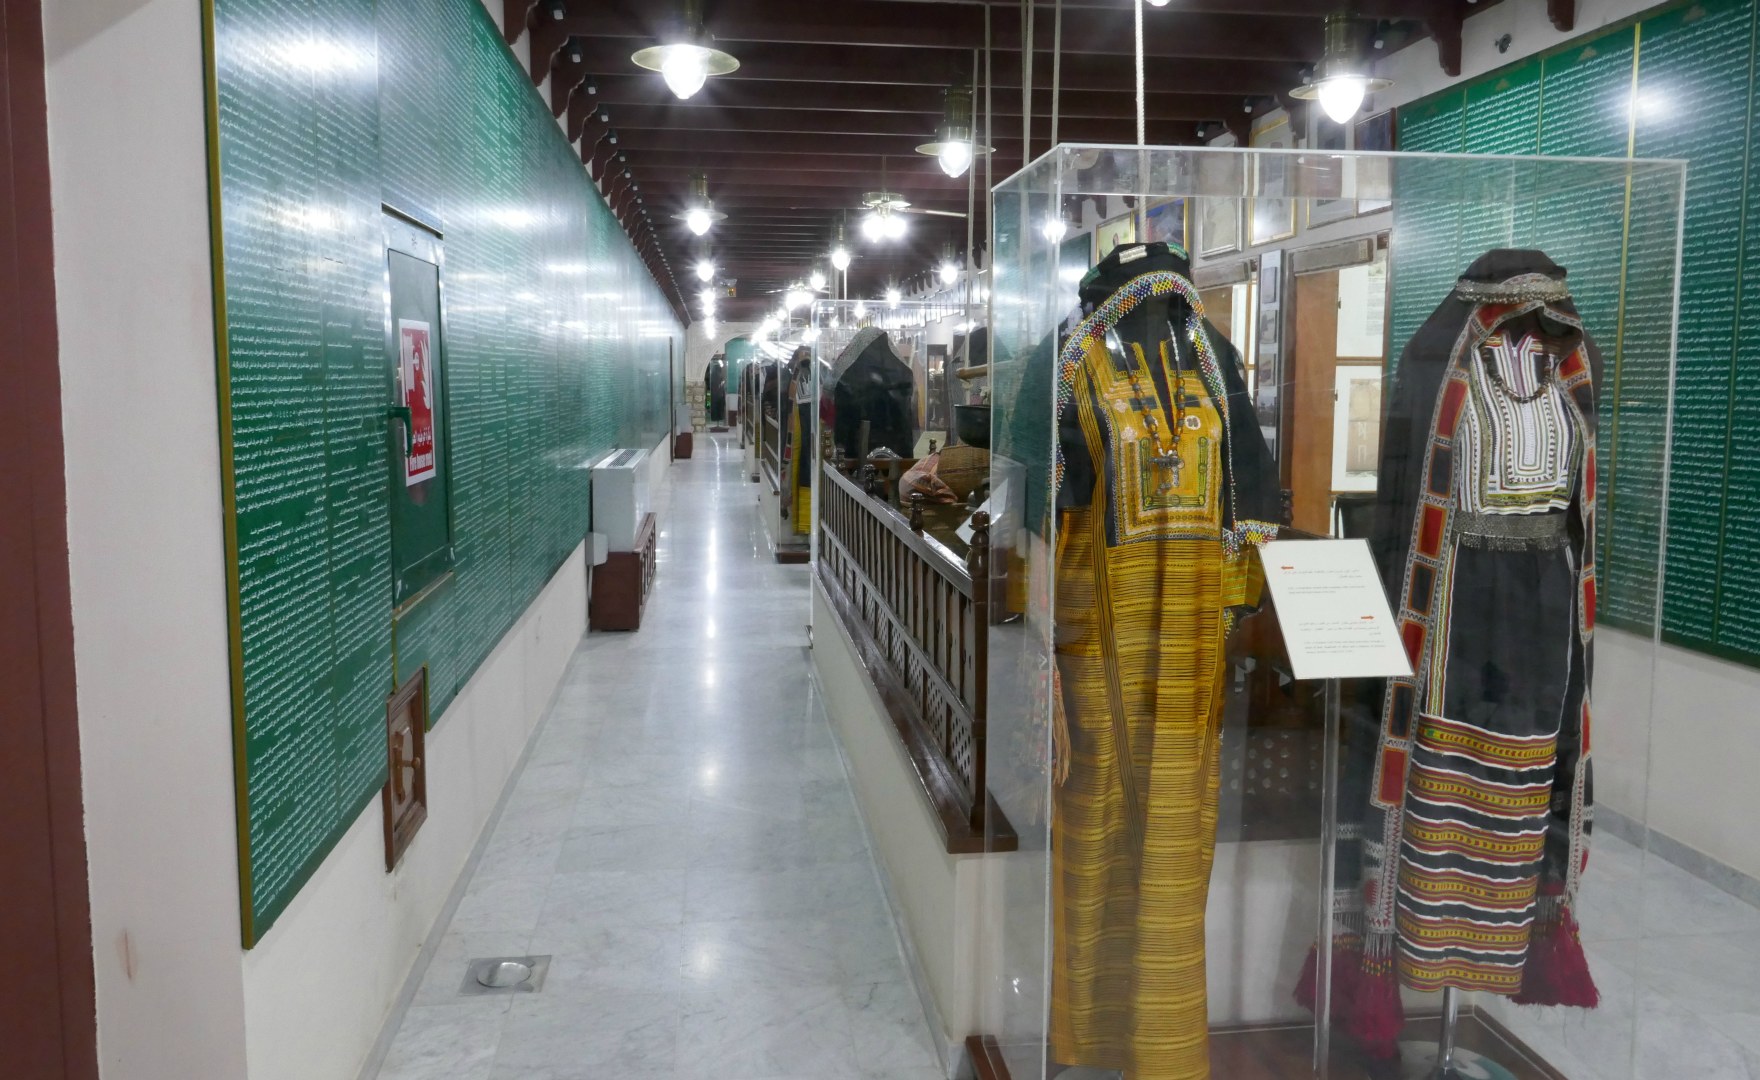 Al-Taybat Museum of Science and Information, Jeddah